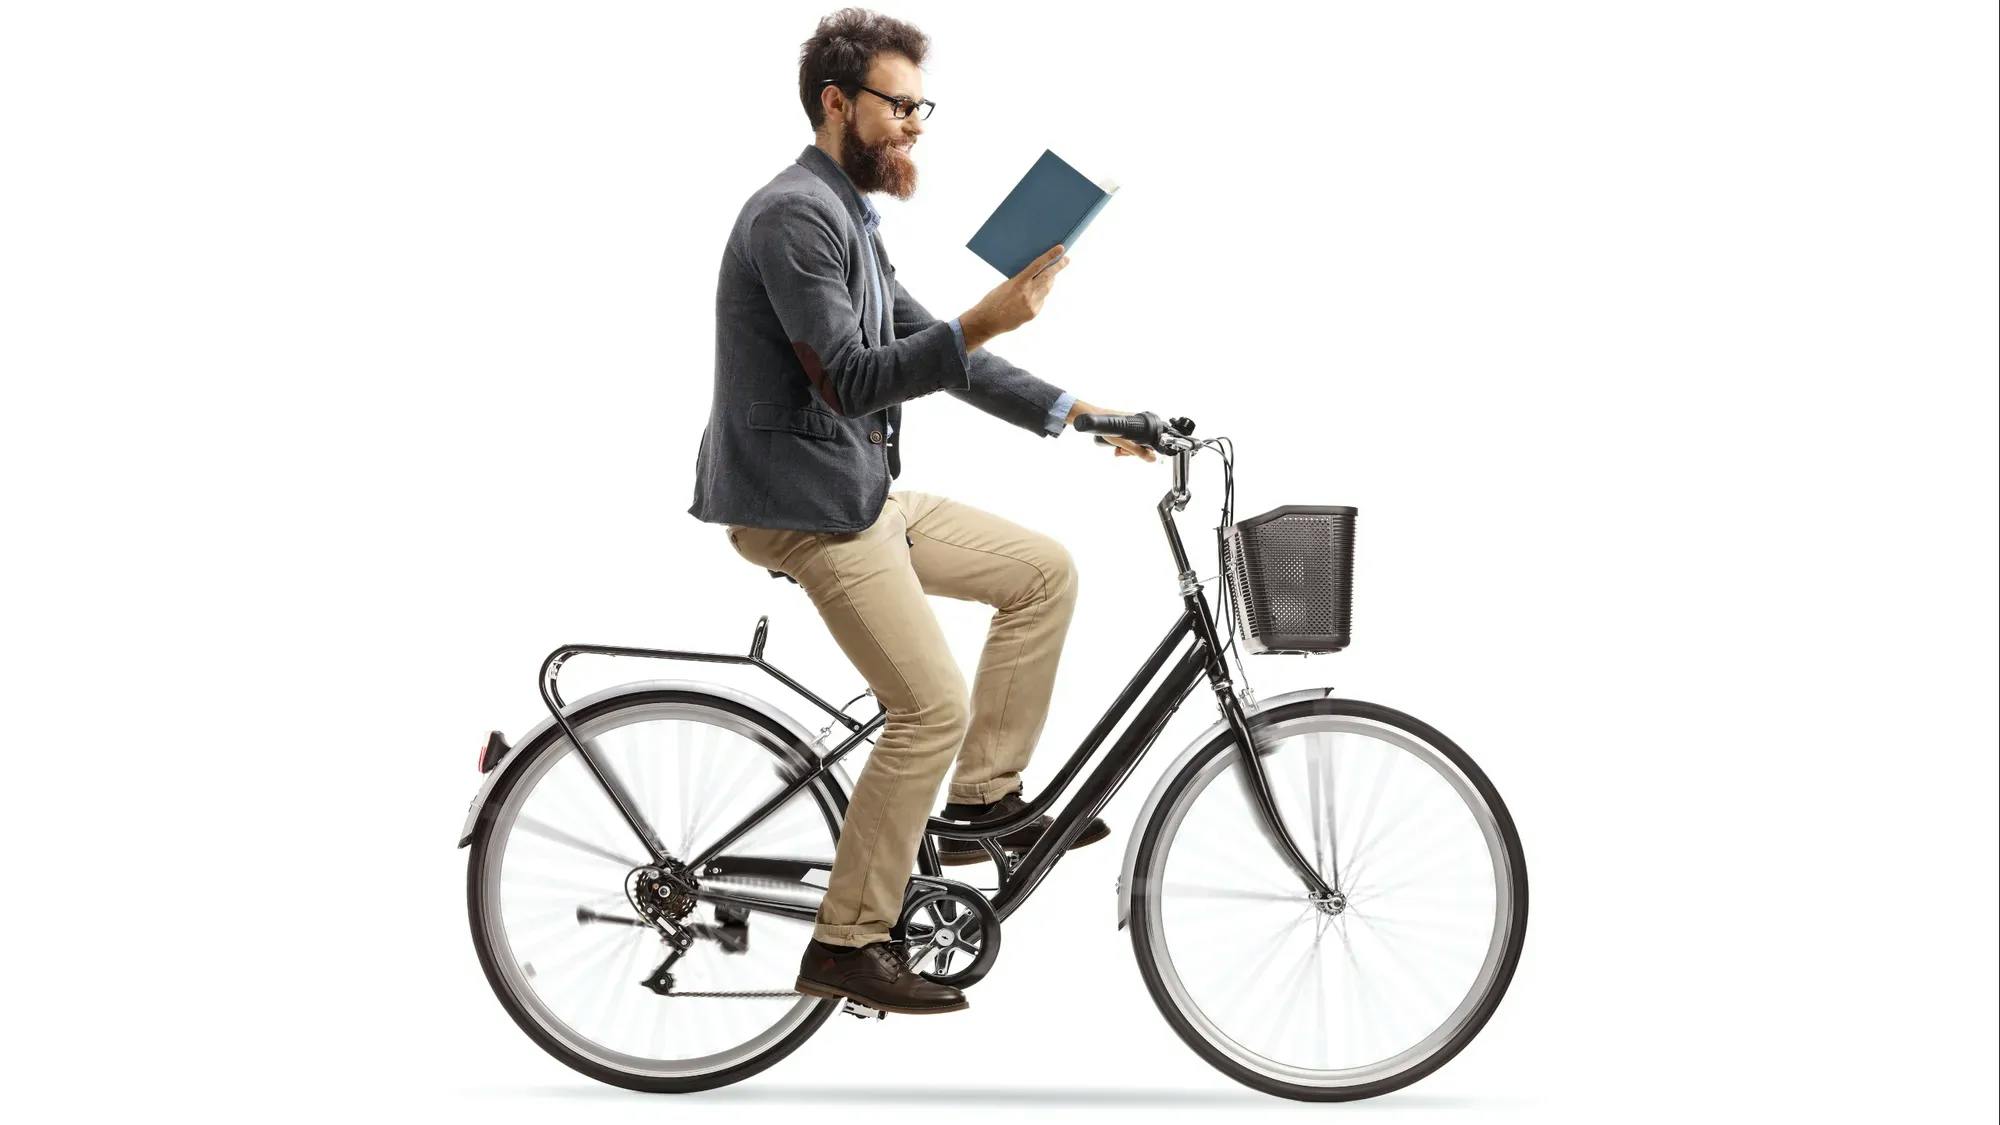 Man riding a bike and reading a book at the same time